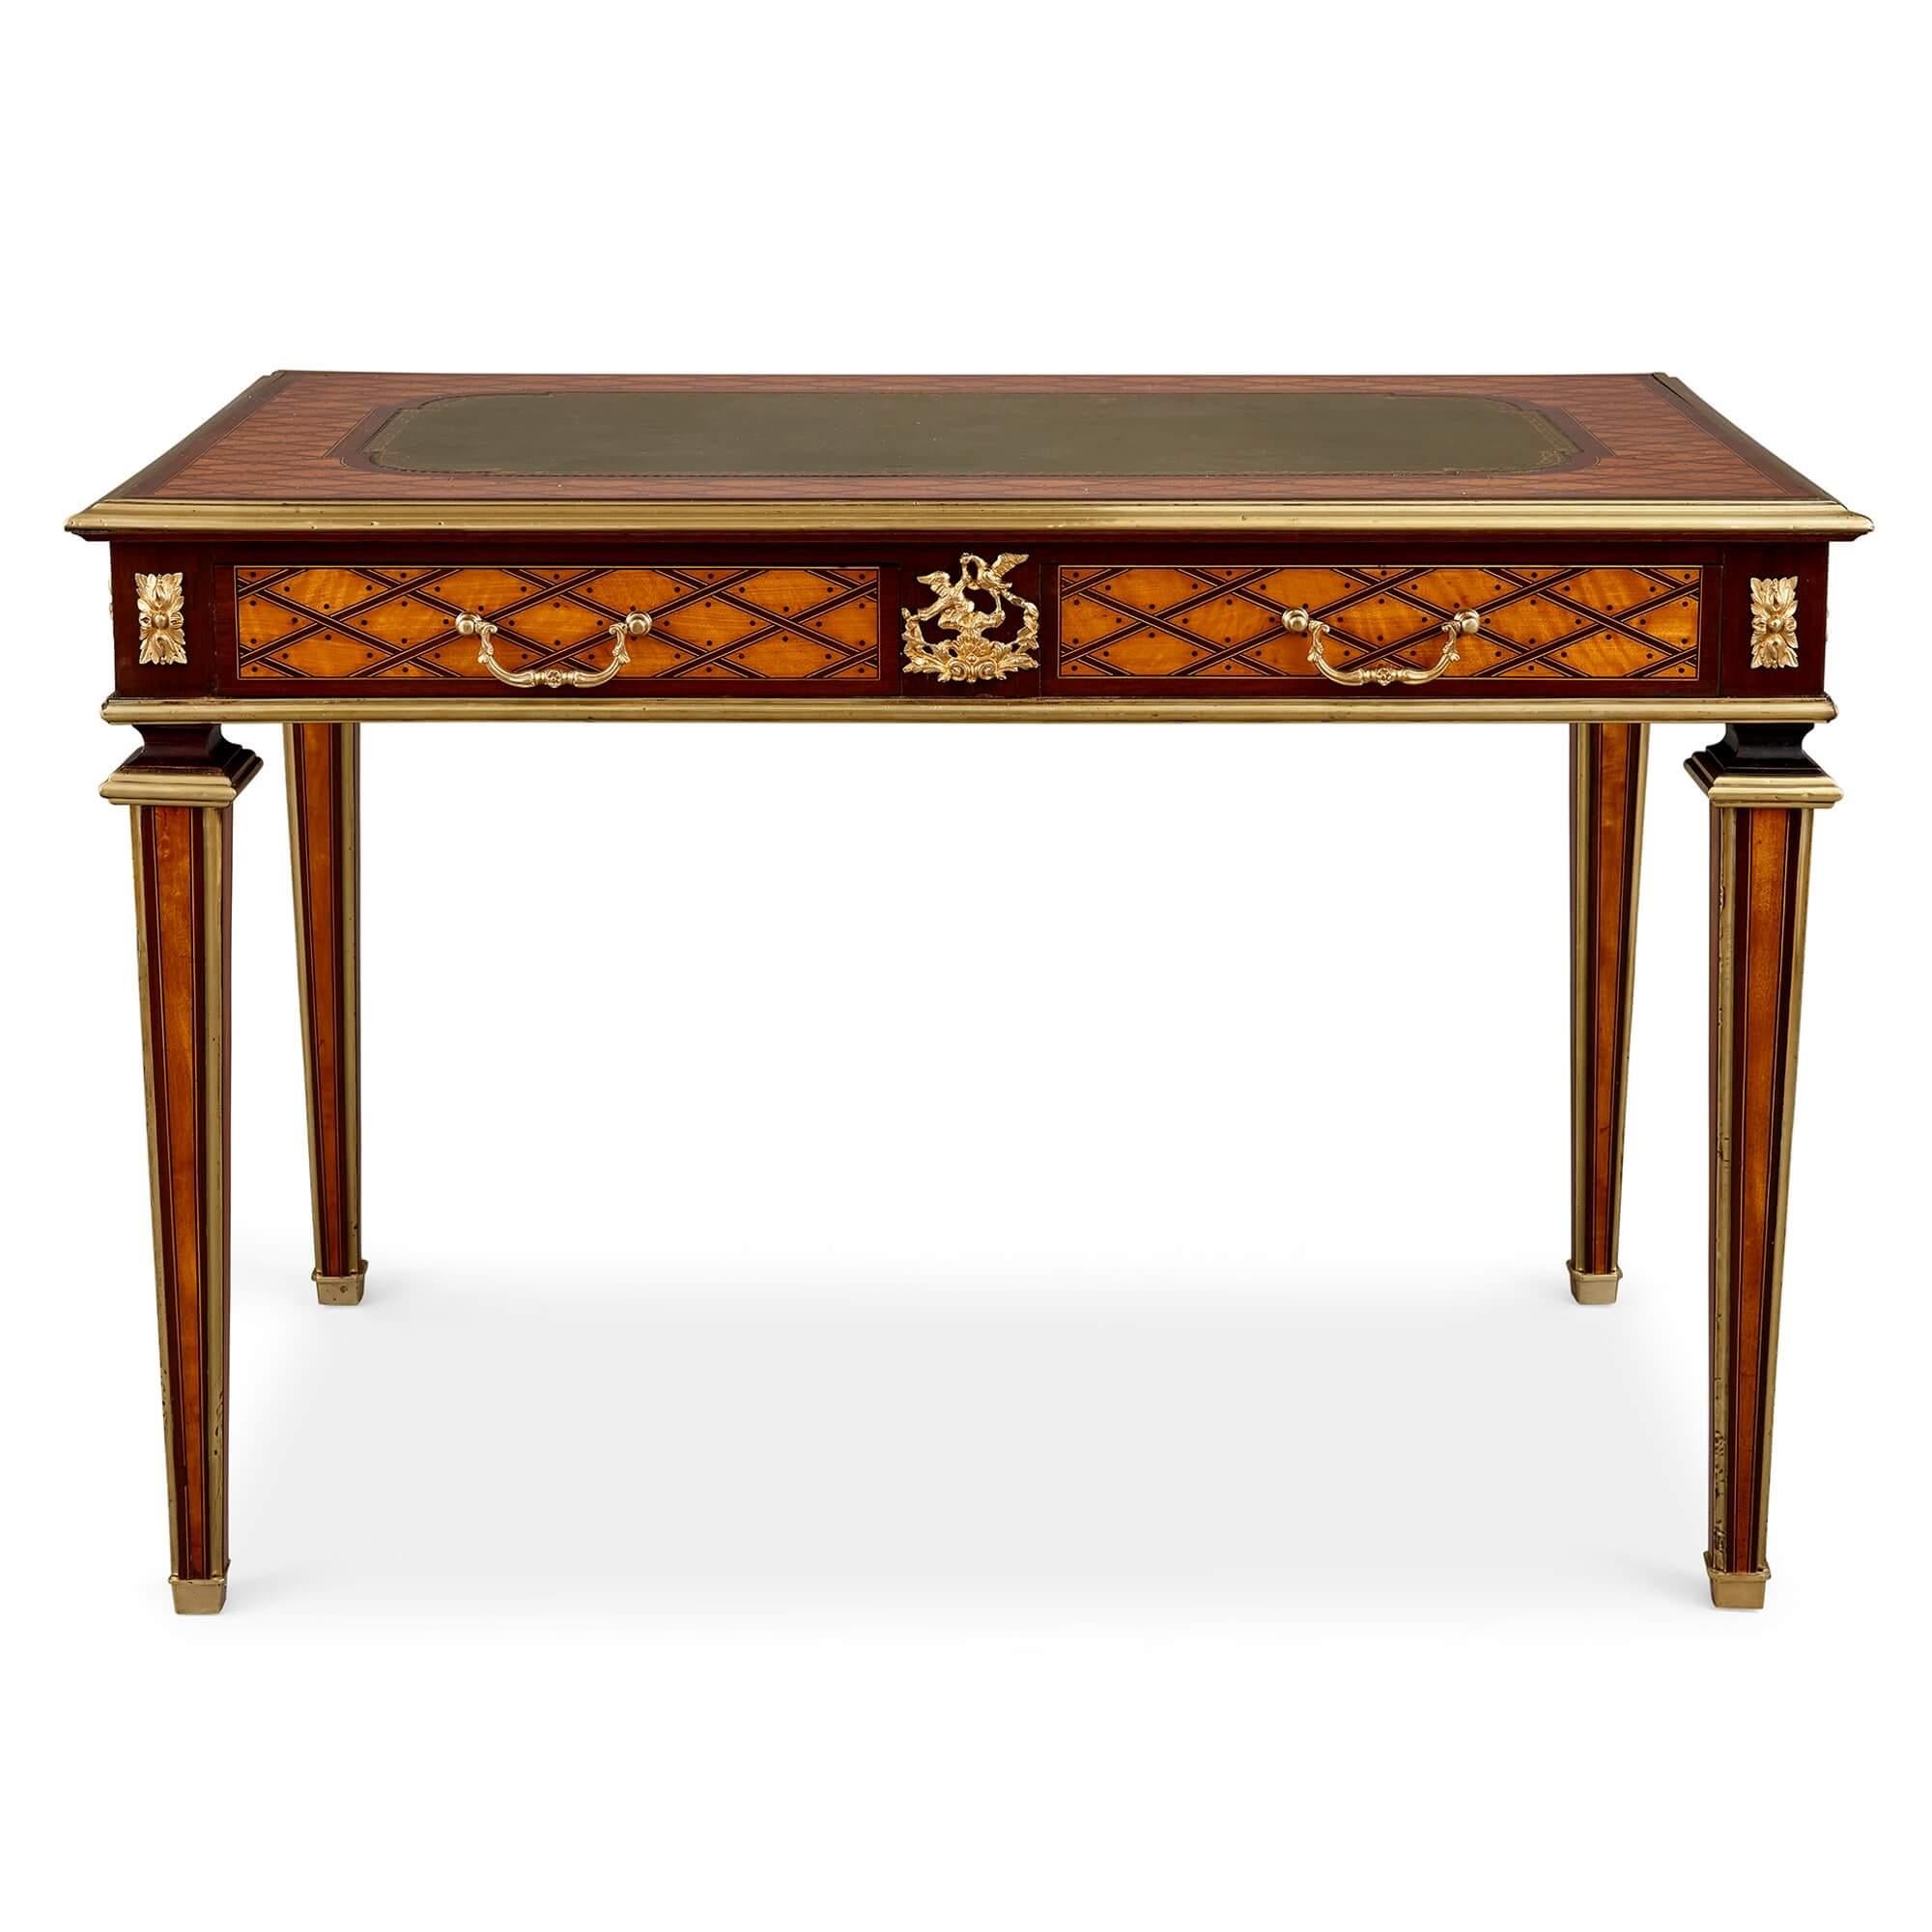 Louis XVI style mahogany, satinwood, ebony and ormolu writing desk by Donald Ross
English, Late 19th Century
Height 73cm, width 108cm, depth 64cm

This excellent piece, a table à écrire, or writing desk, was made by Donald Ross, an important